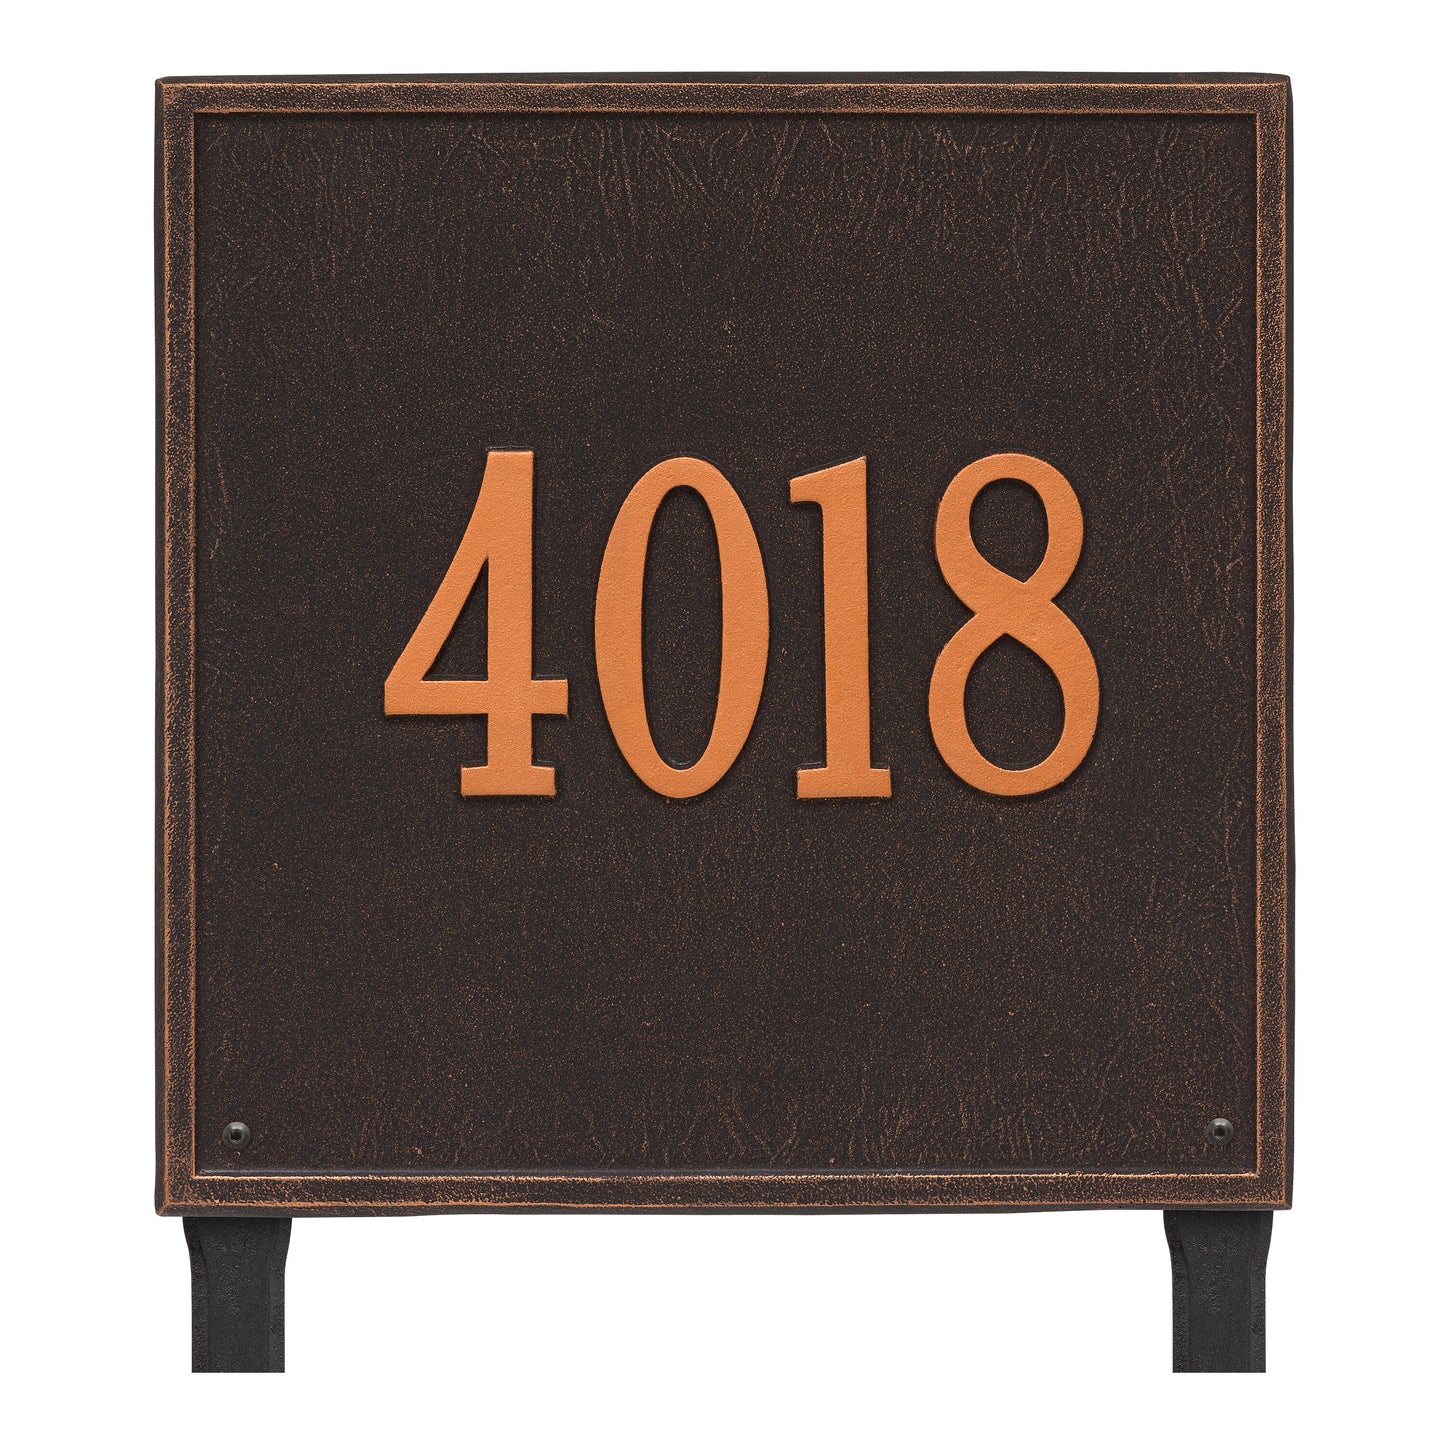 Whitehall Products Personalized Square Estate Lawn Plaque One Line Bronze/gold